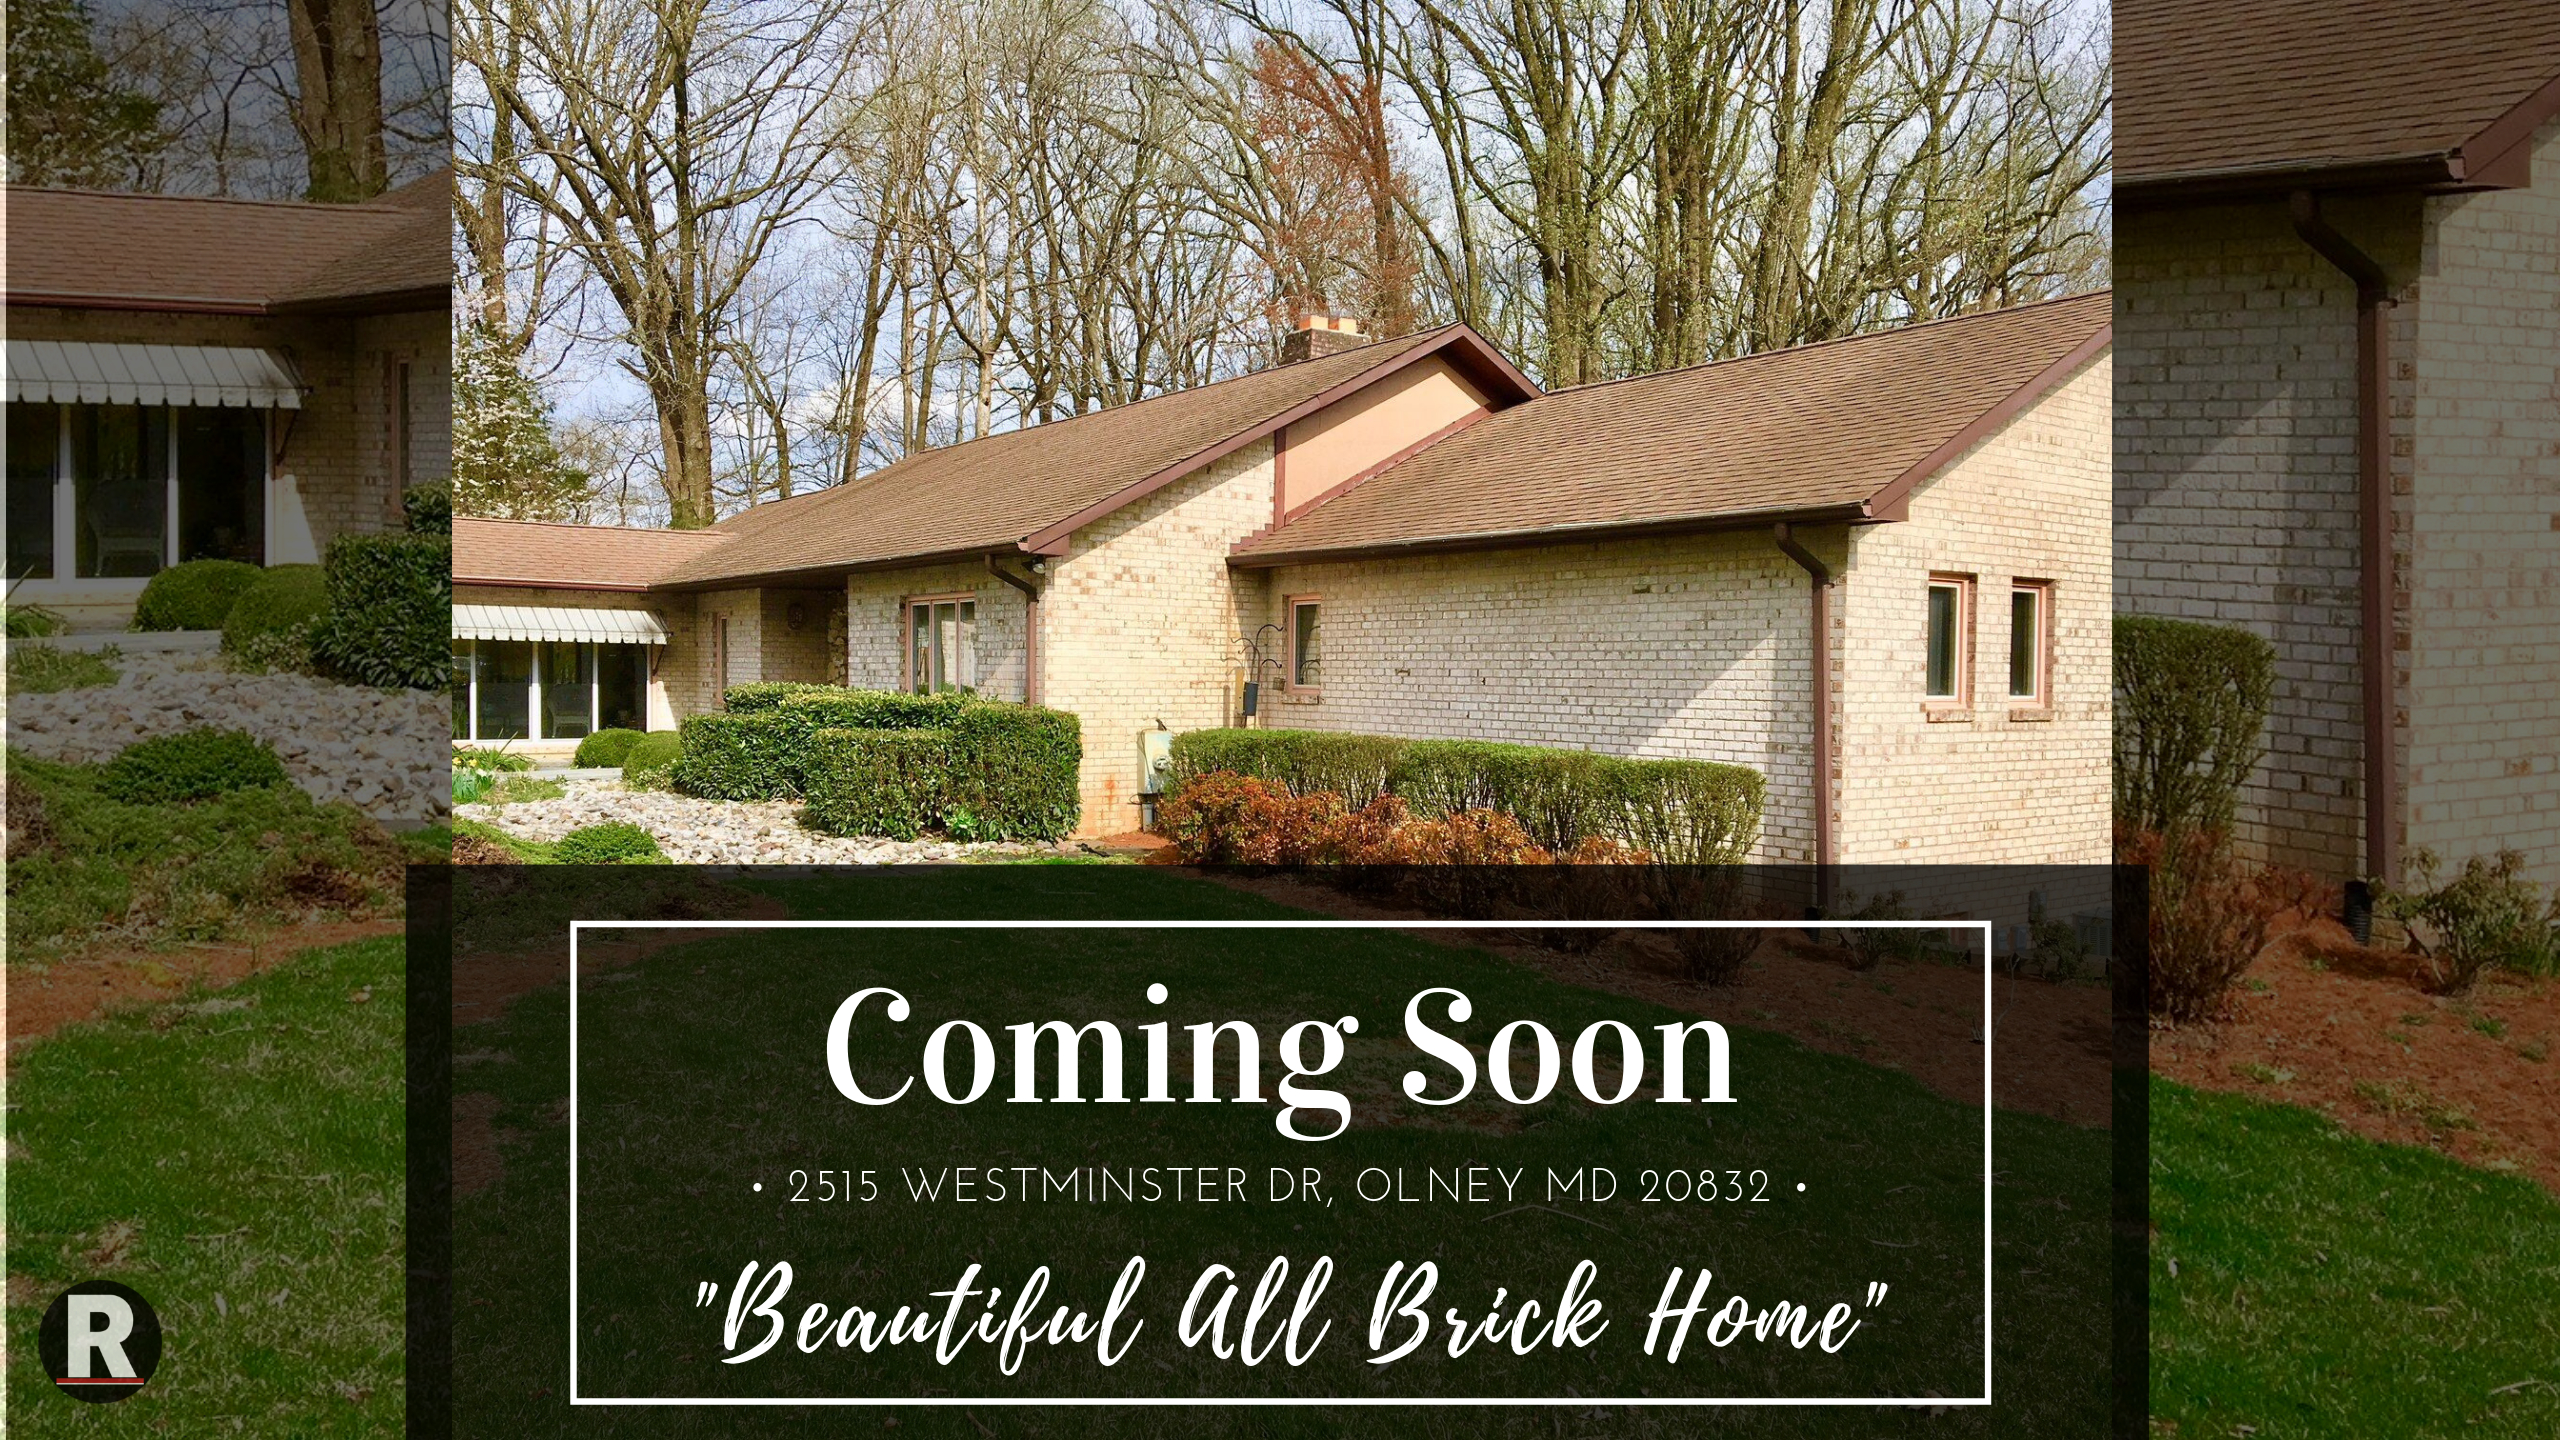 Coming Soon! 2515 Westminster Dr, Olney MD 20832